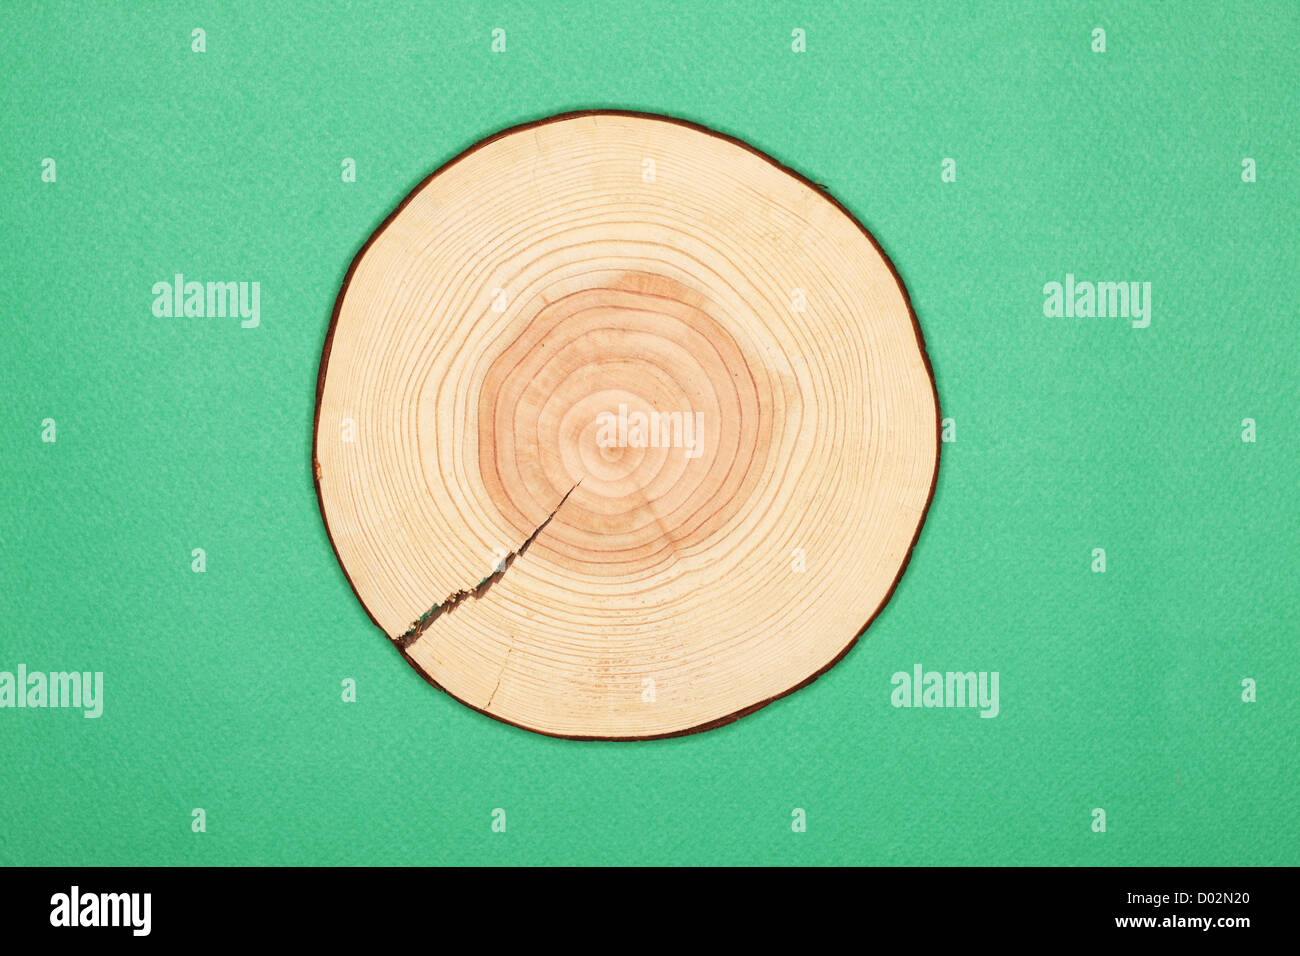 Annual rings of tree trunk Stock Photo